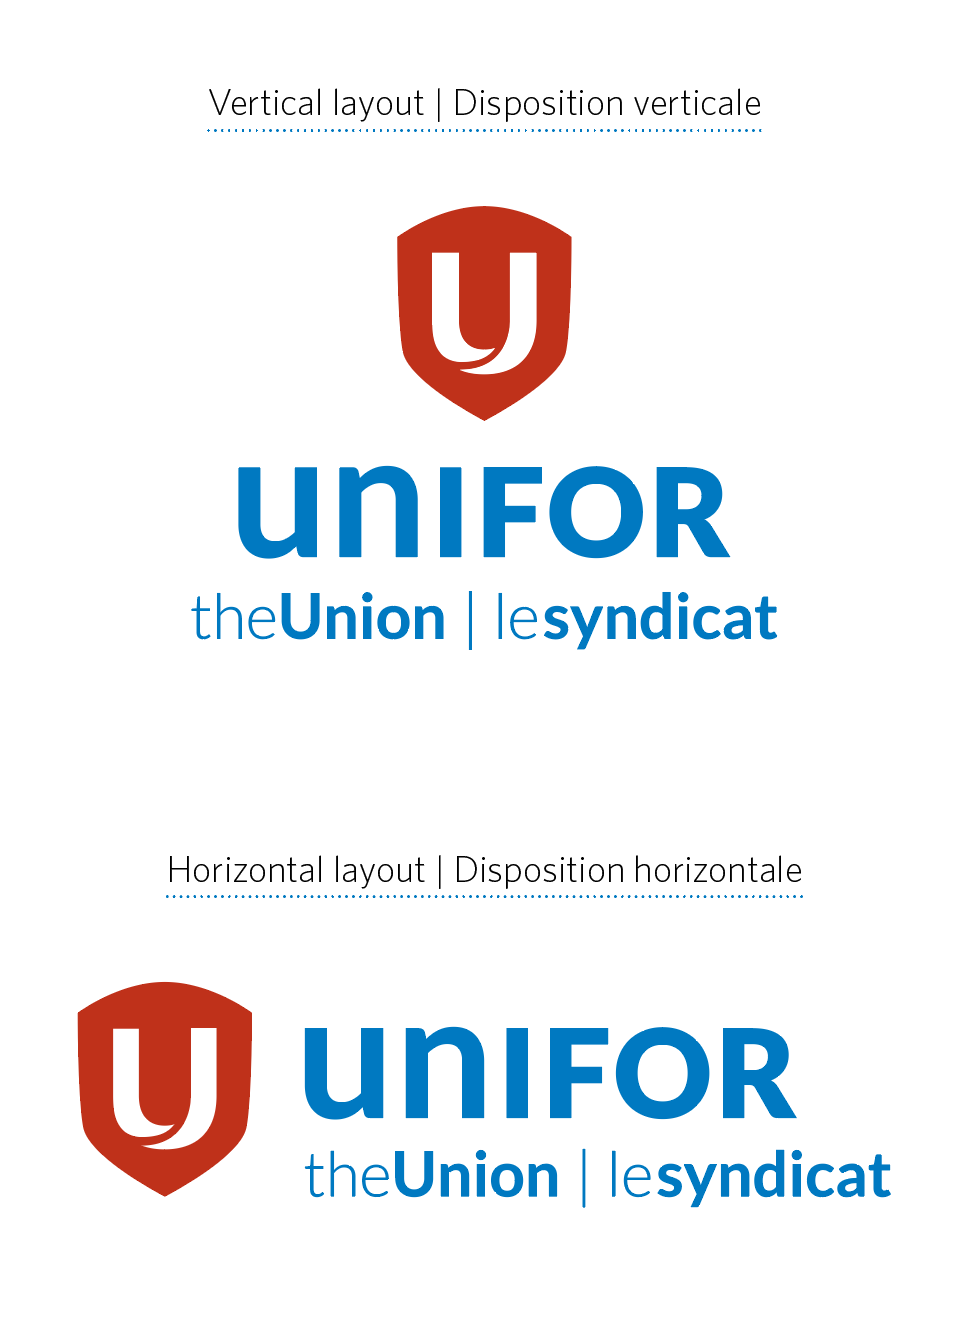 Unifor logo in vertical and horizontal formats